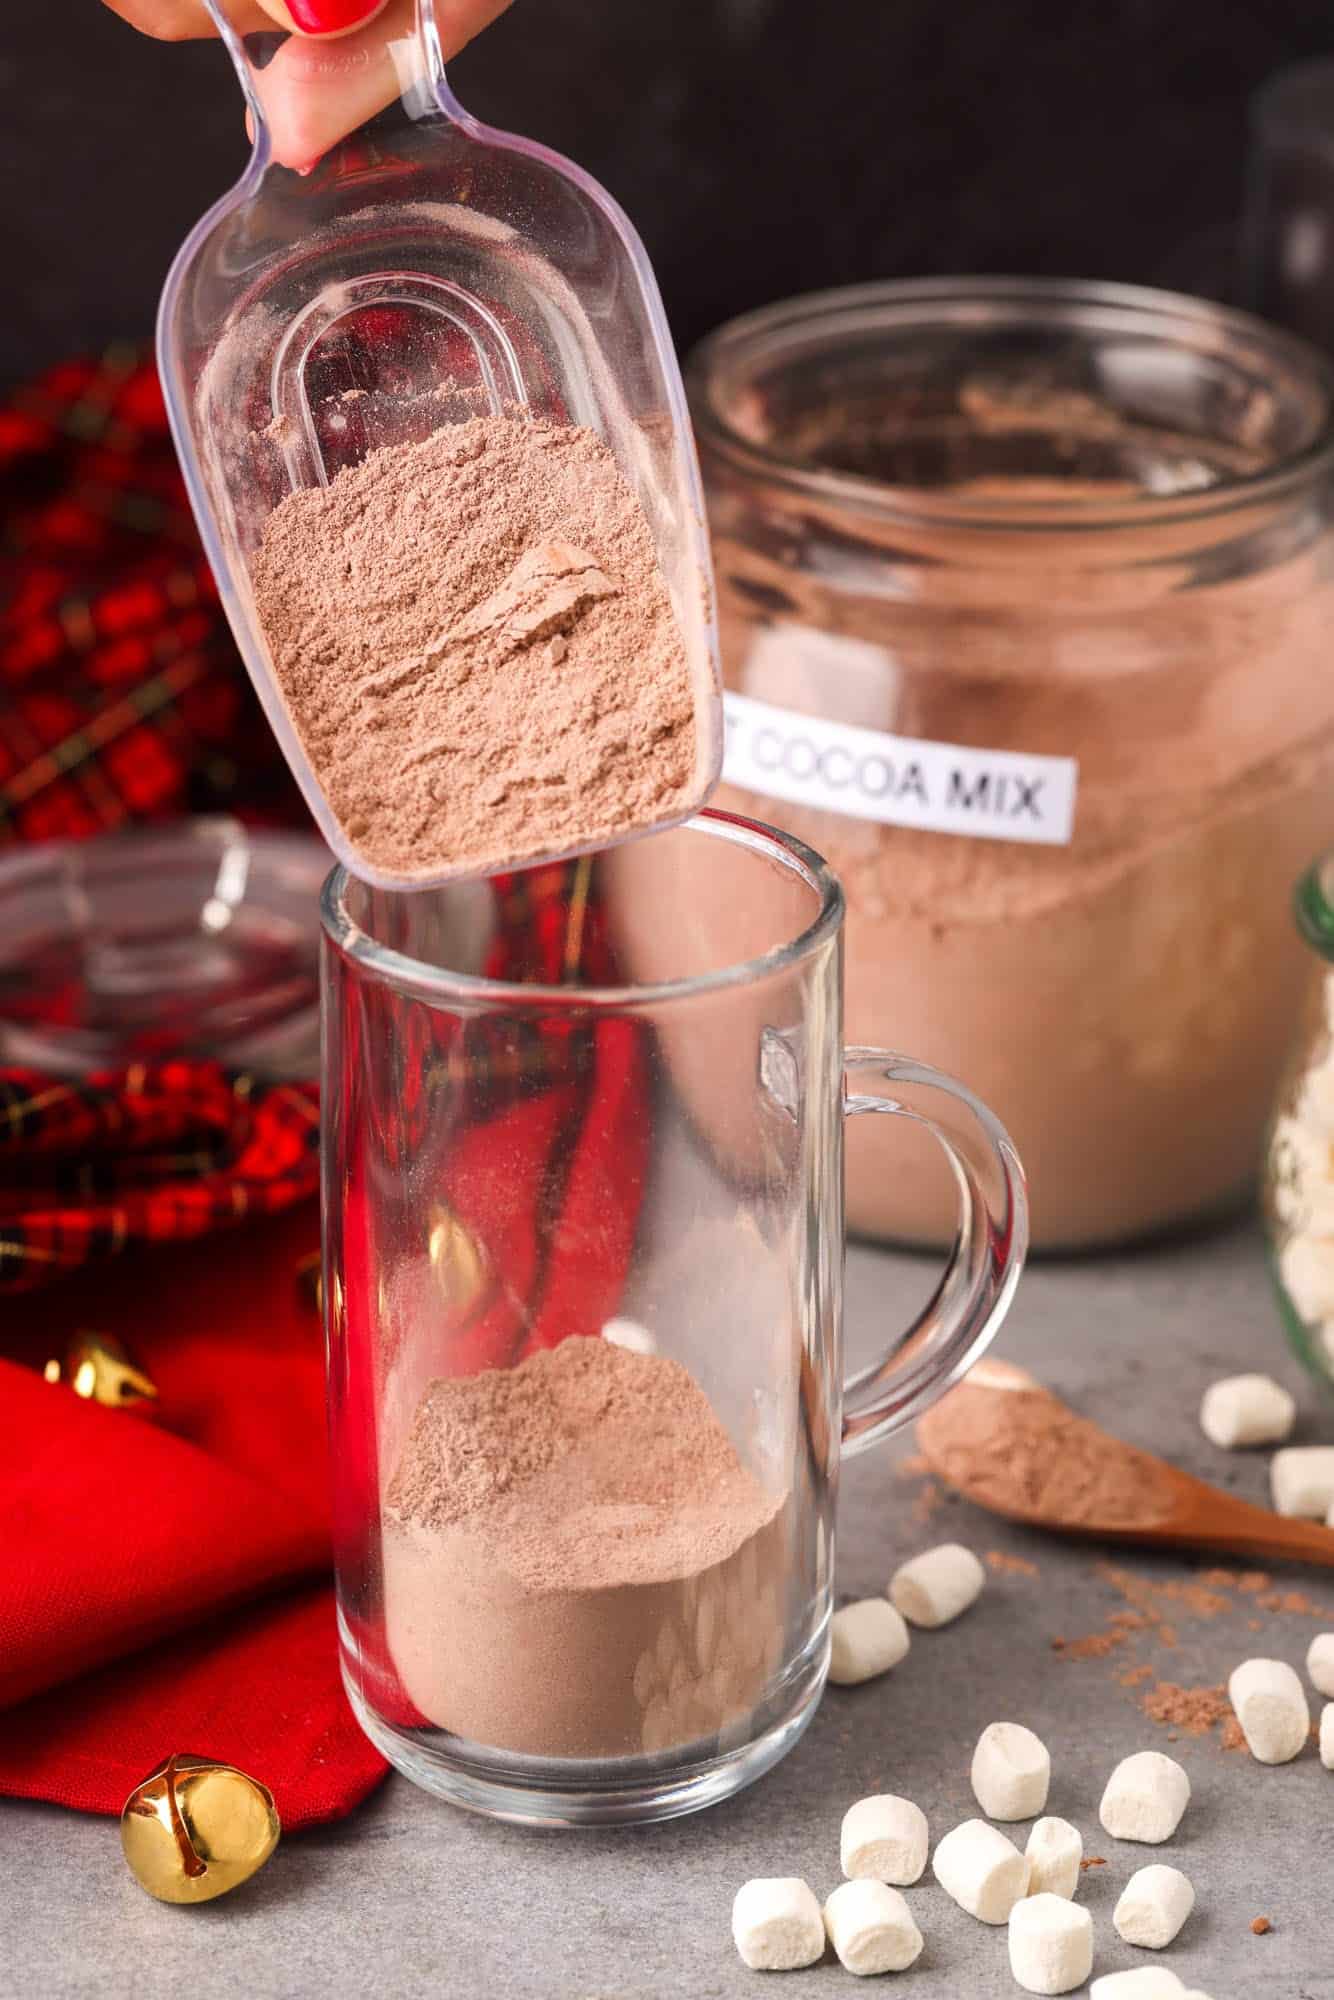 hot cocoa mix added to a mug with a small scoop